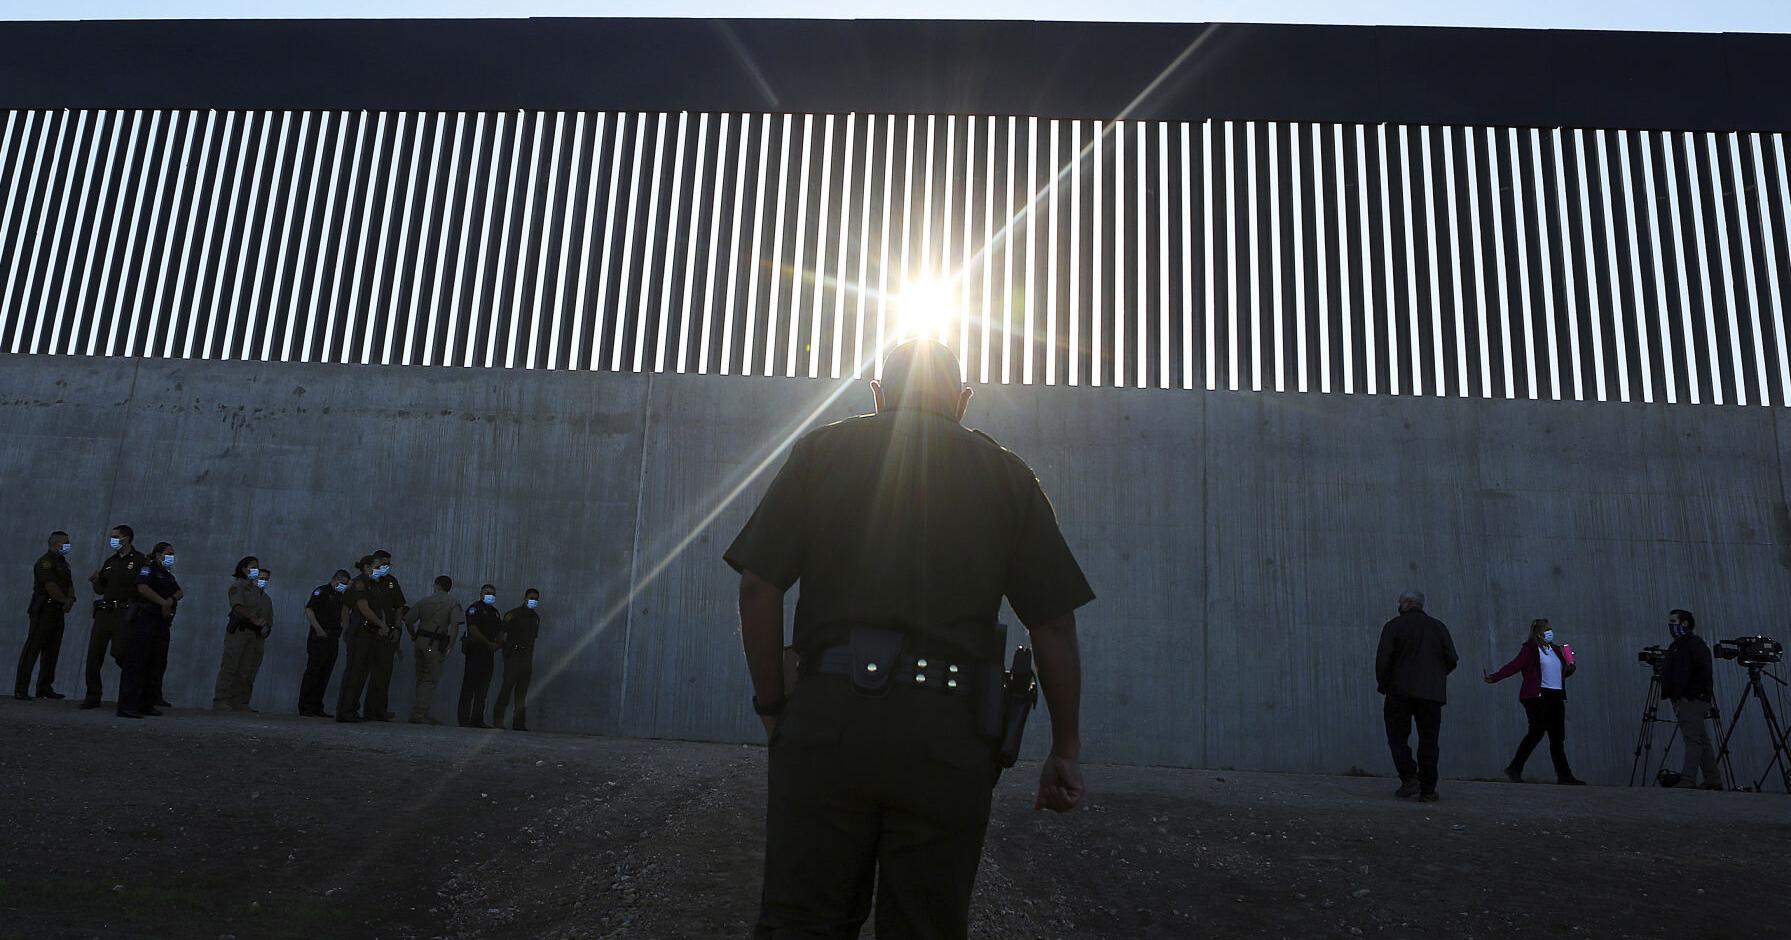 Bill to set aside $5 million for border wall construction narrowly passes committee